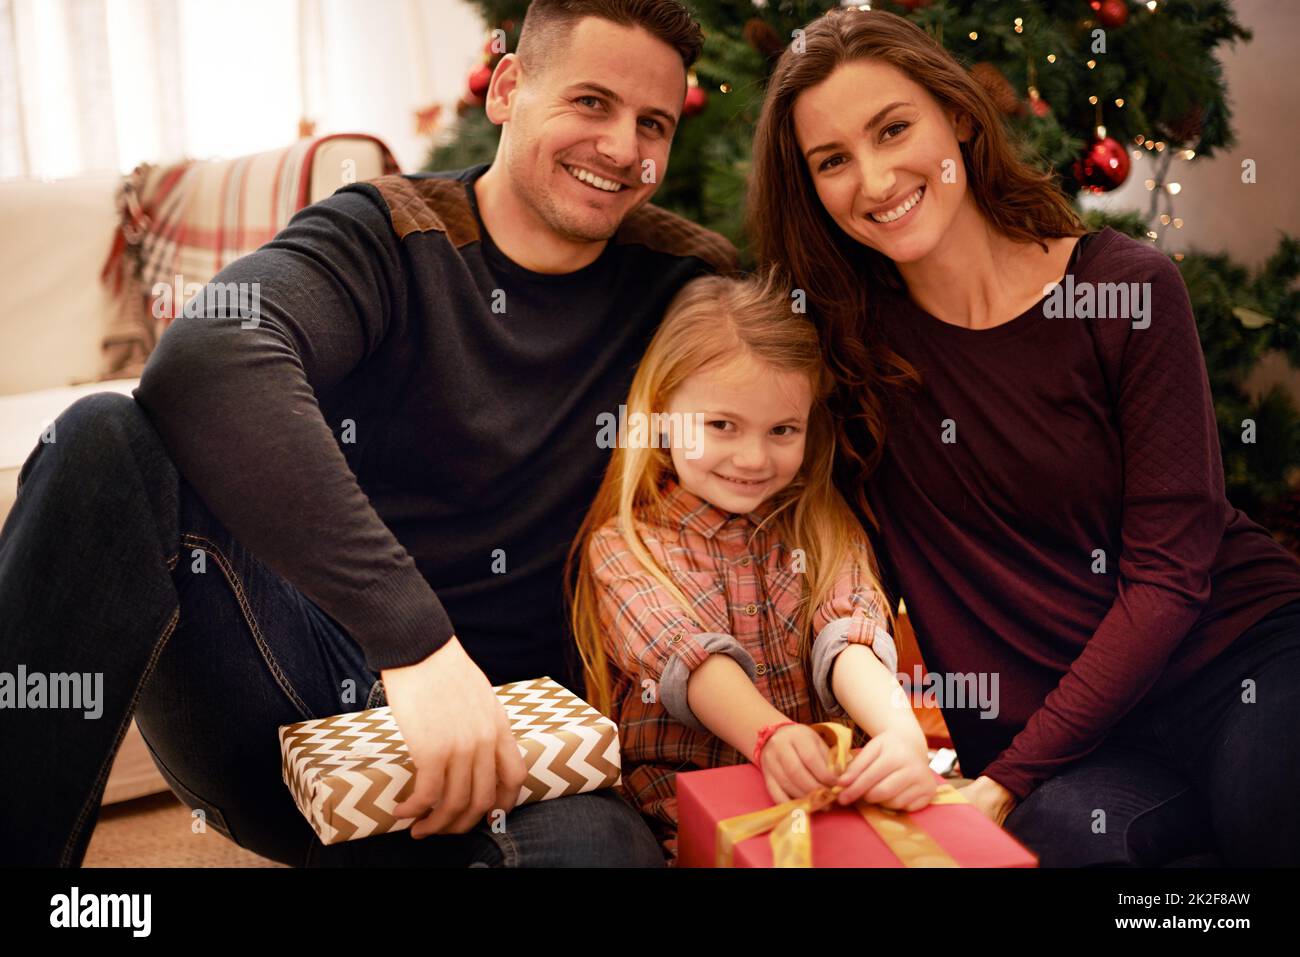 Feeling the festive cheer. Portrait of a young family celebrating Christmas. Stock Photo